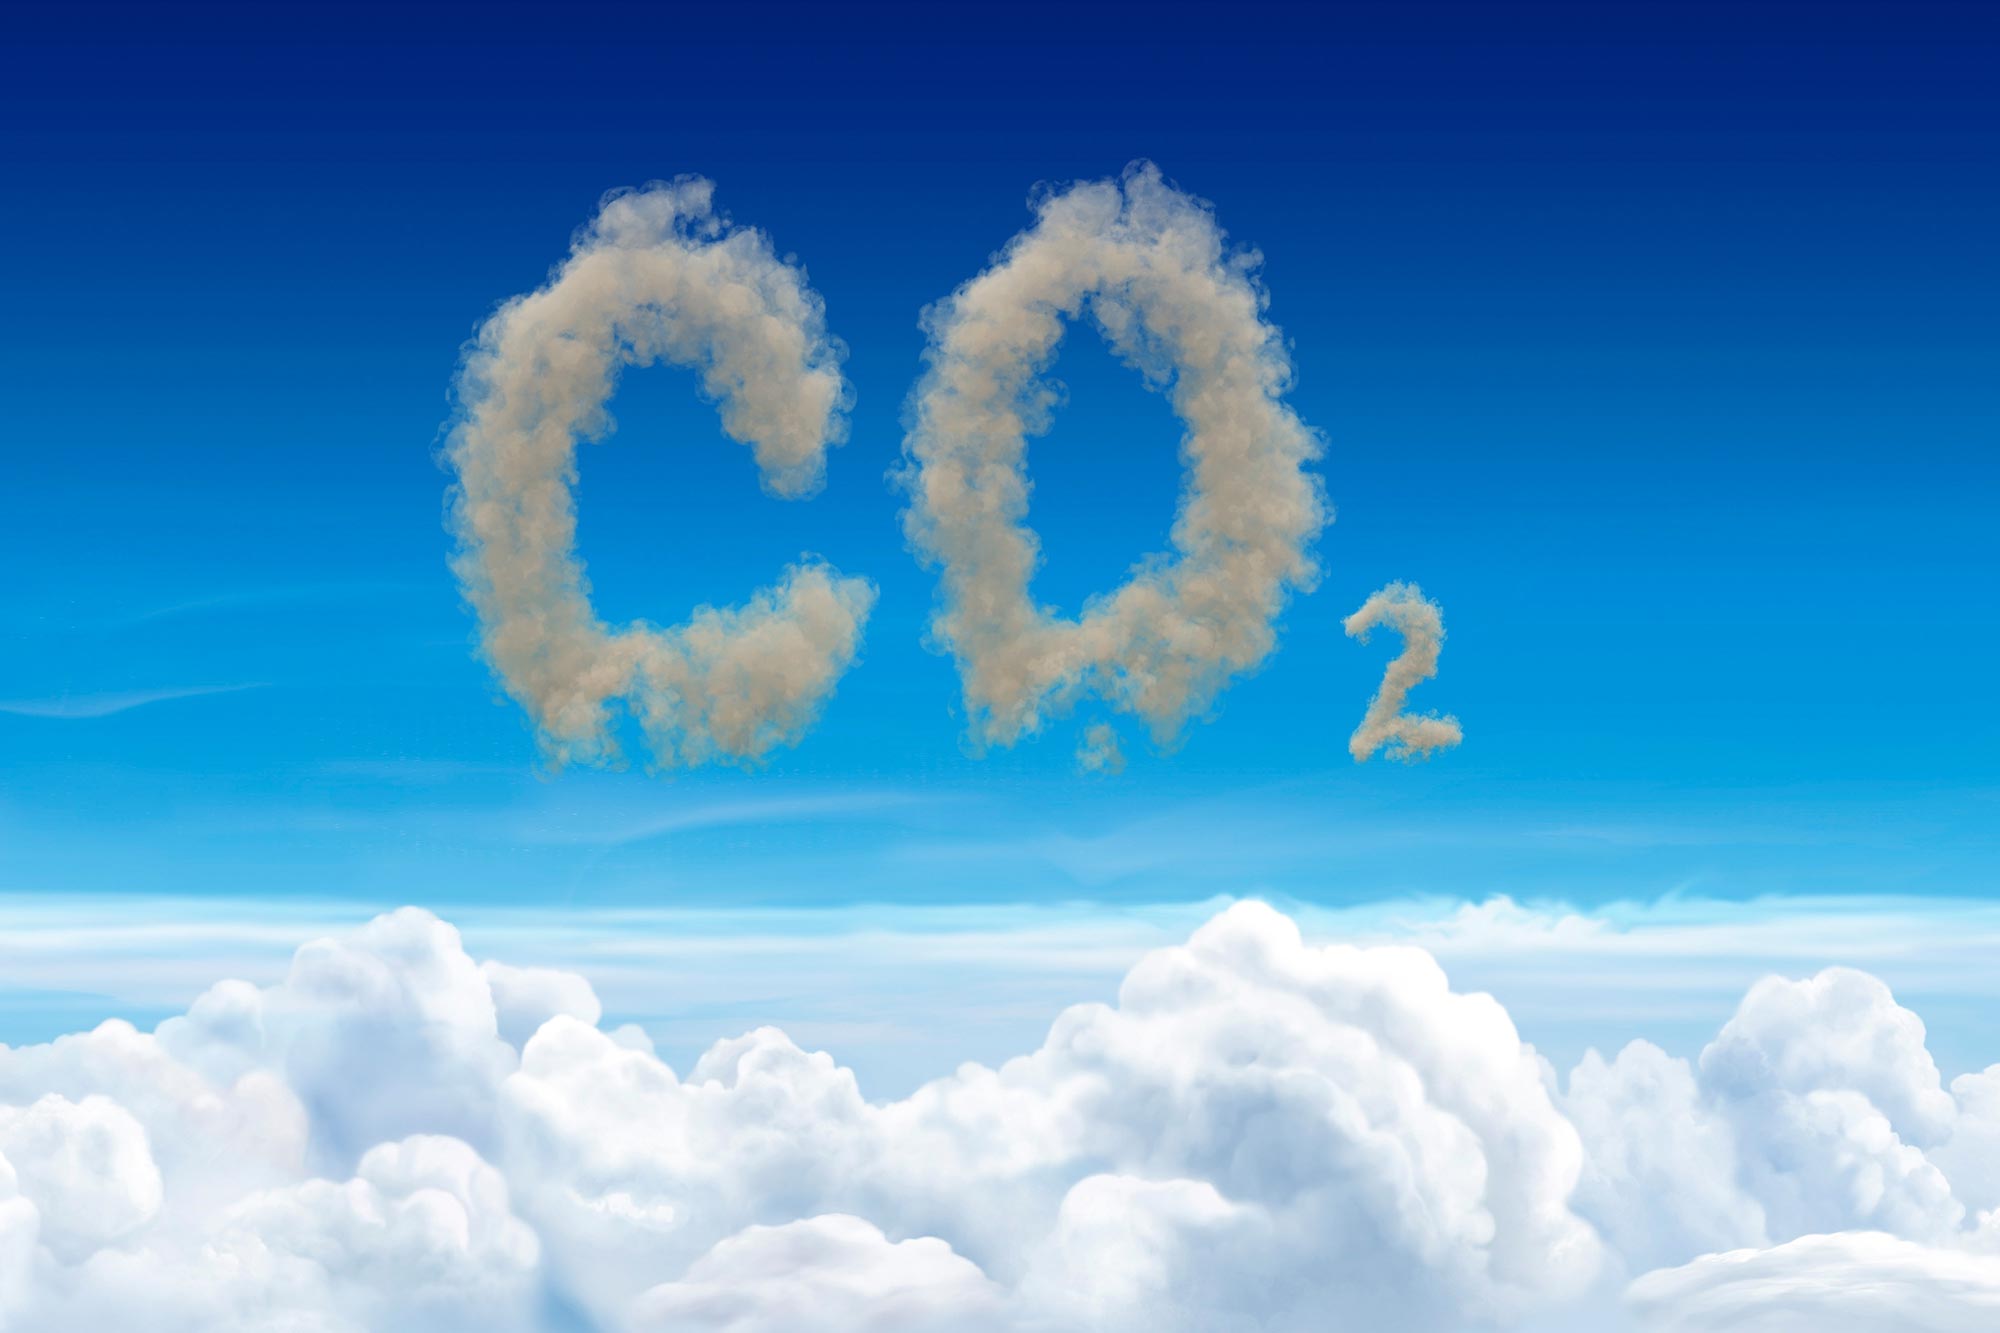 https://scitechdaily.com/images/Carbon-Dioxide-Atmosphere-Concept.jpg